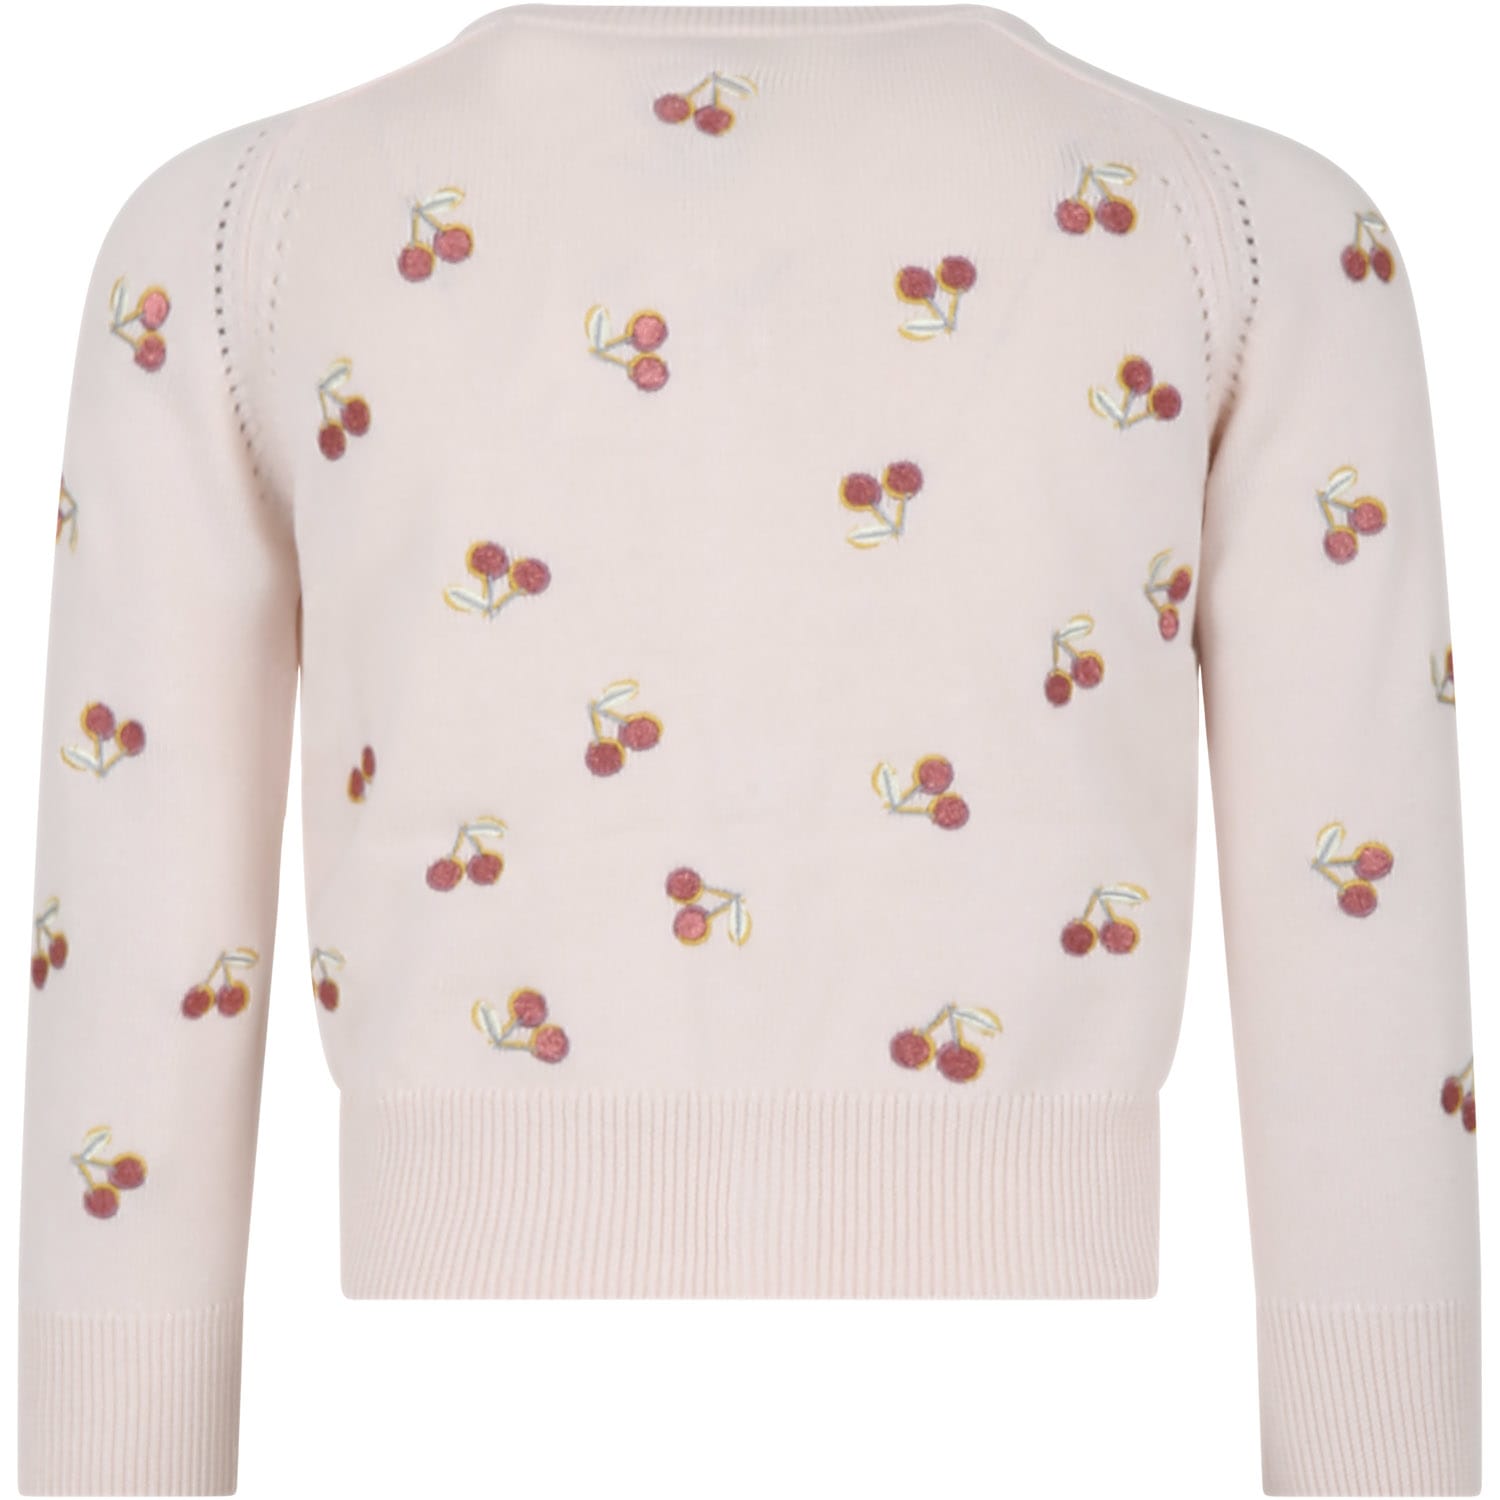 Shop Bonpoint Pink Cardigan For Girl With Cherries